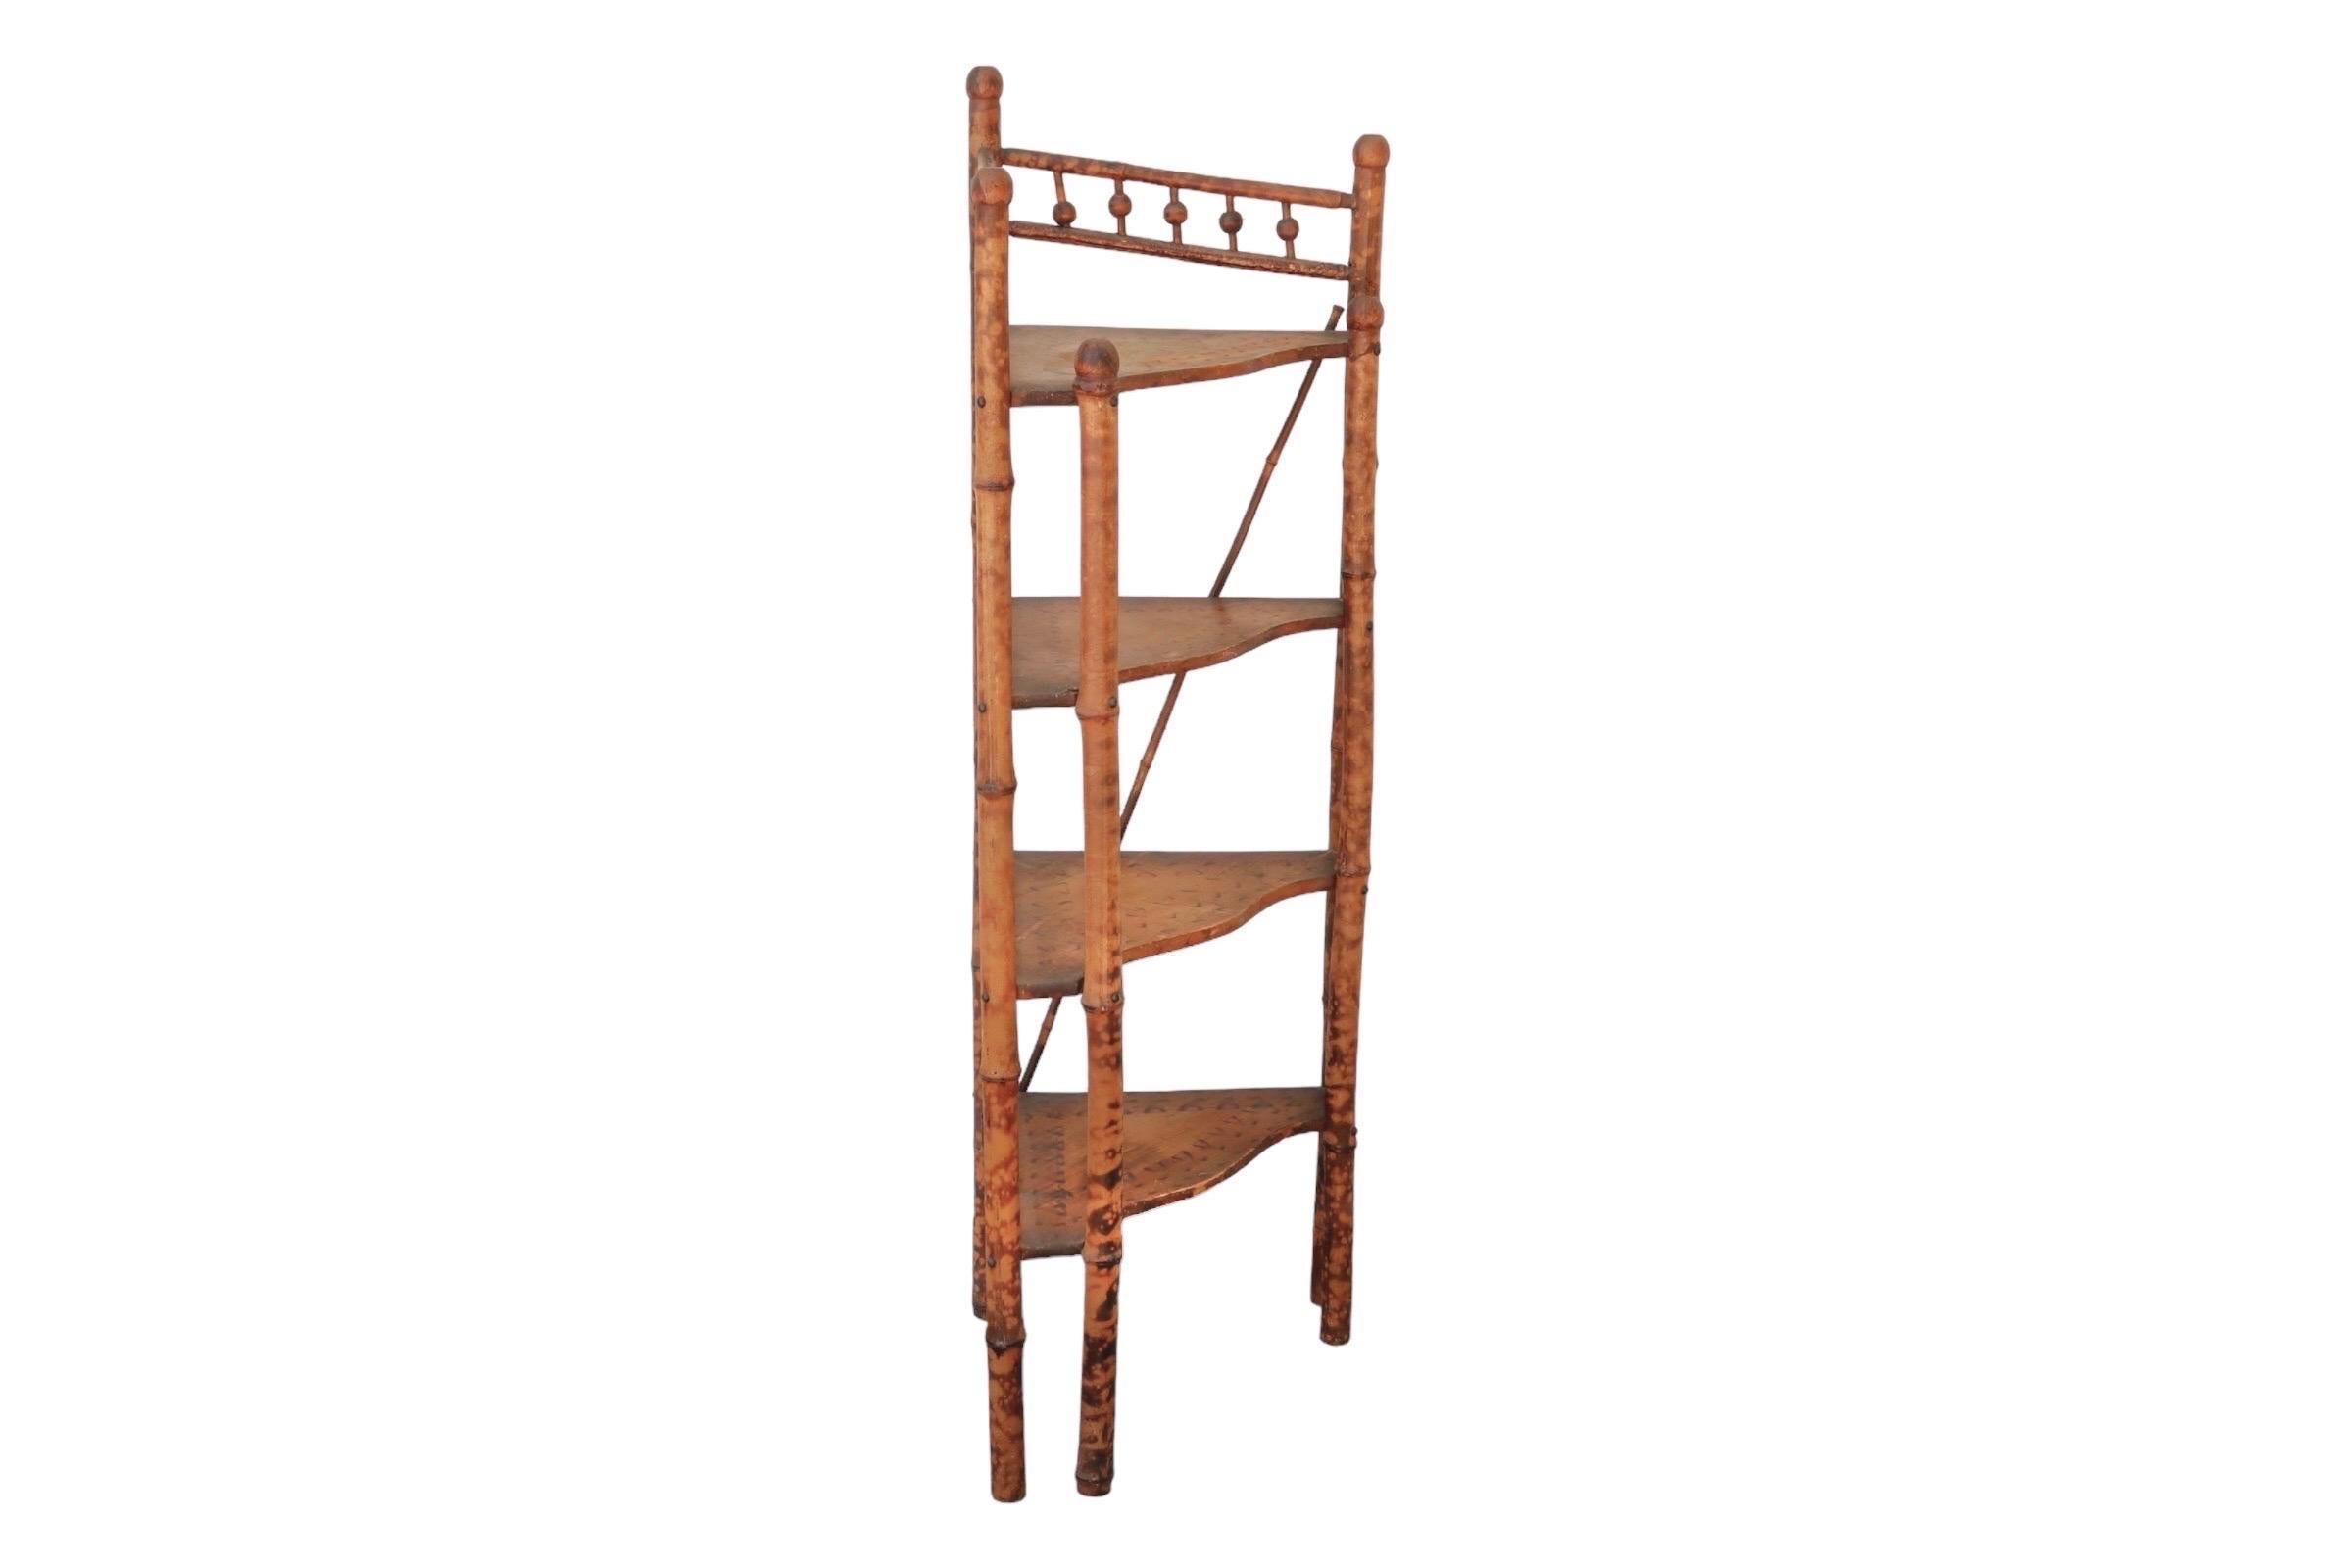 An antique faux tortoise shell corner etagere made of bamboo. Four serpentine carved shelves and five bamboo supports are painted with a dappled “faux tortoise shell” finish. The top shelf is decorated with a pencil wood bamboo gallery rail, with